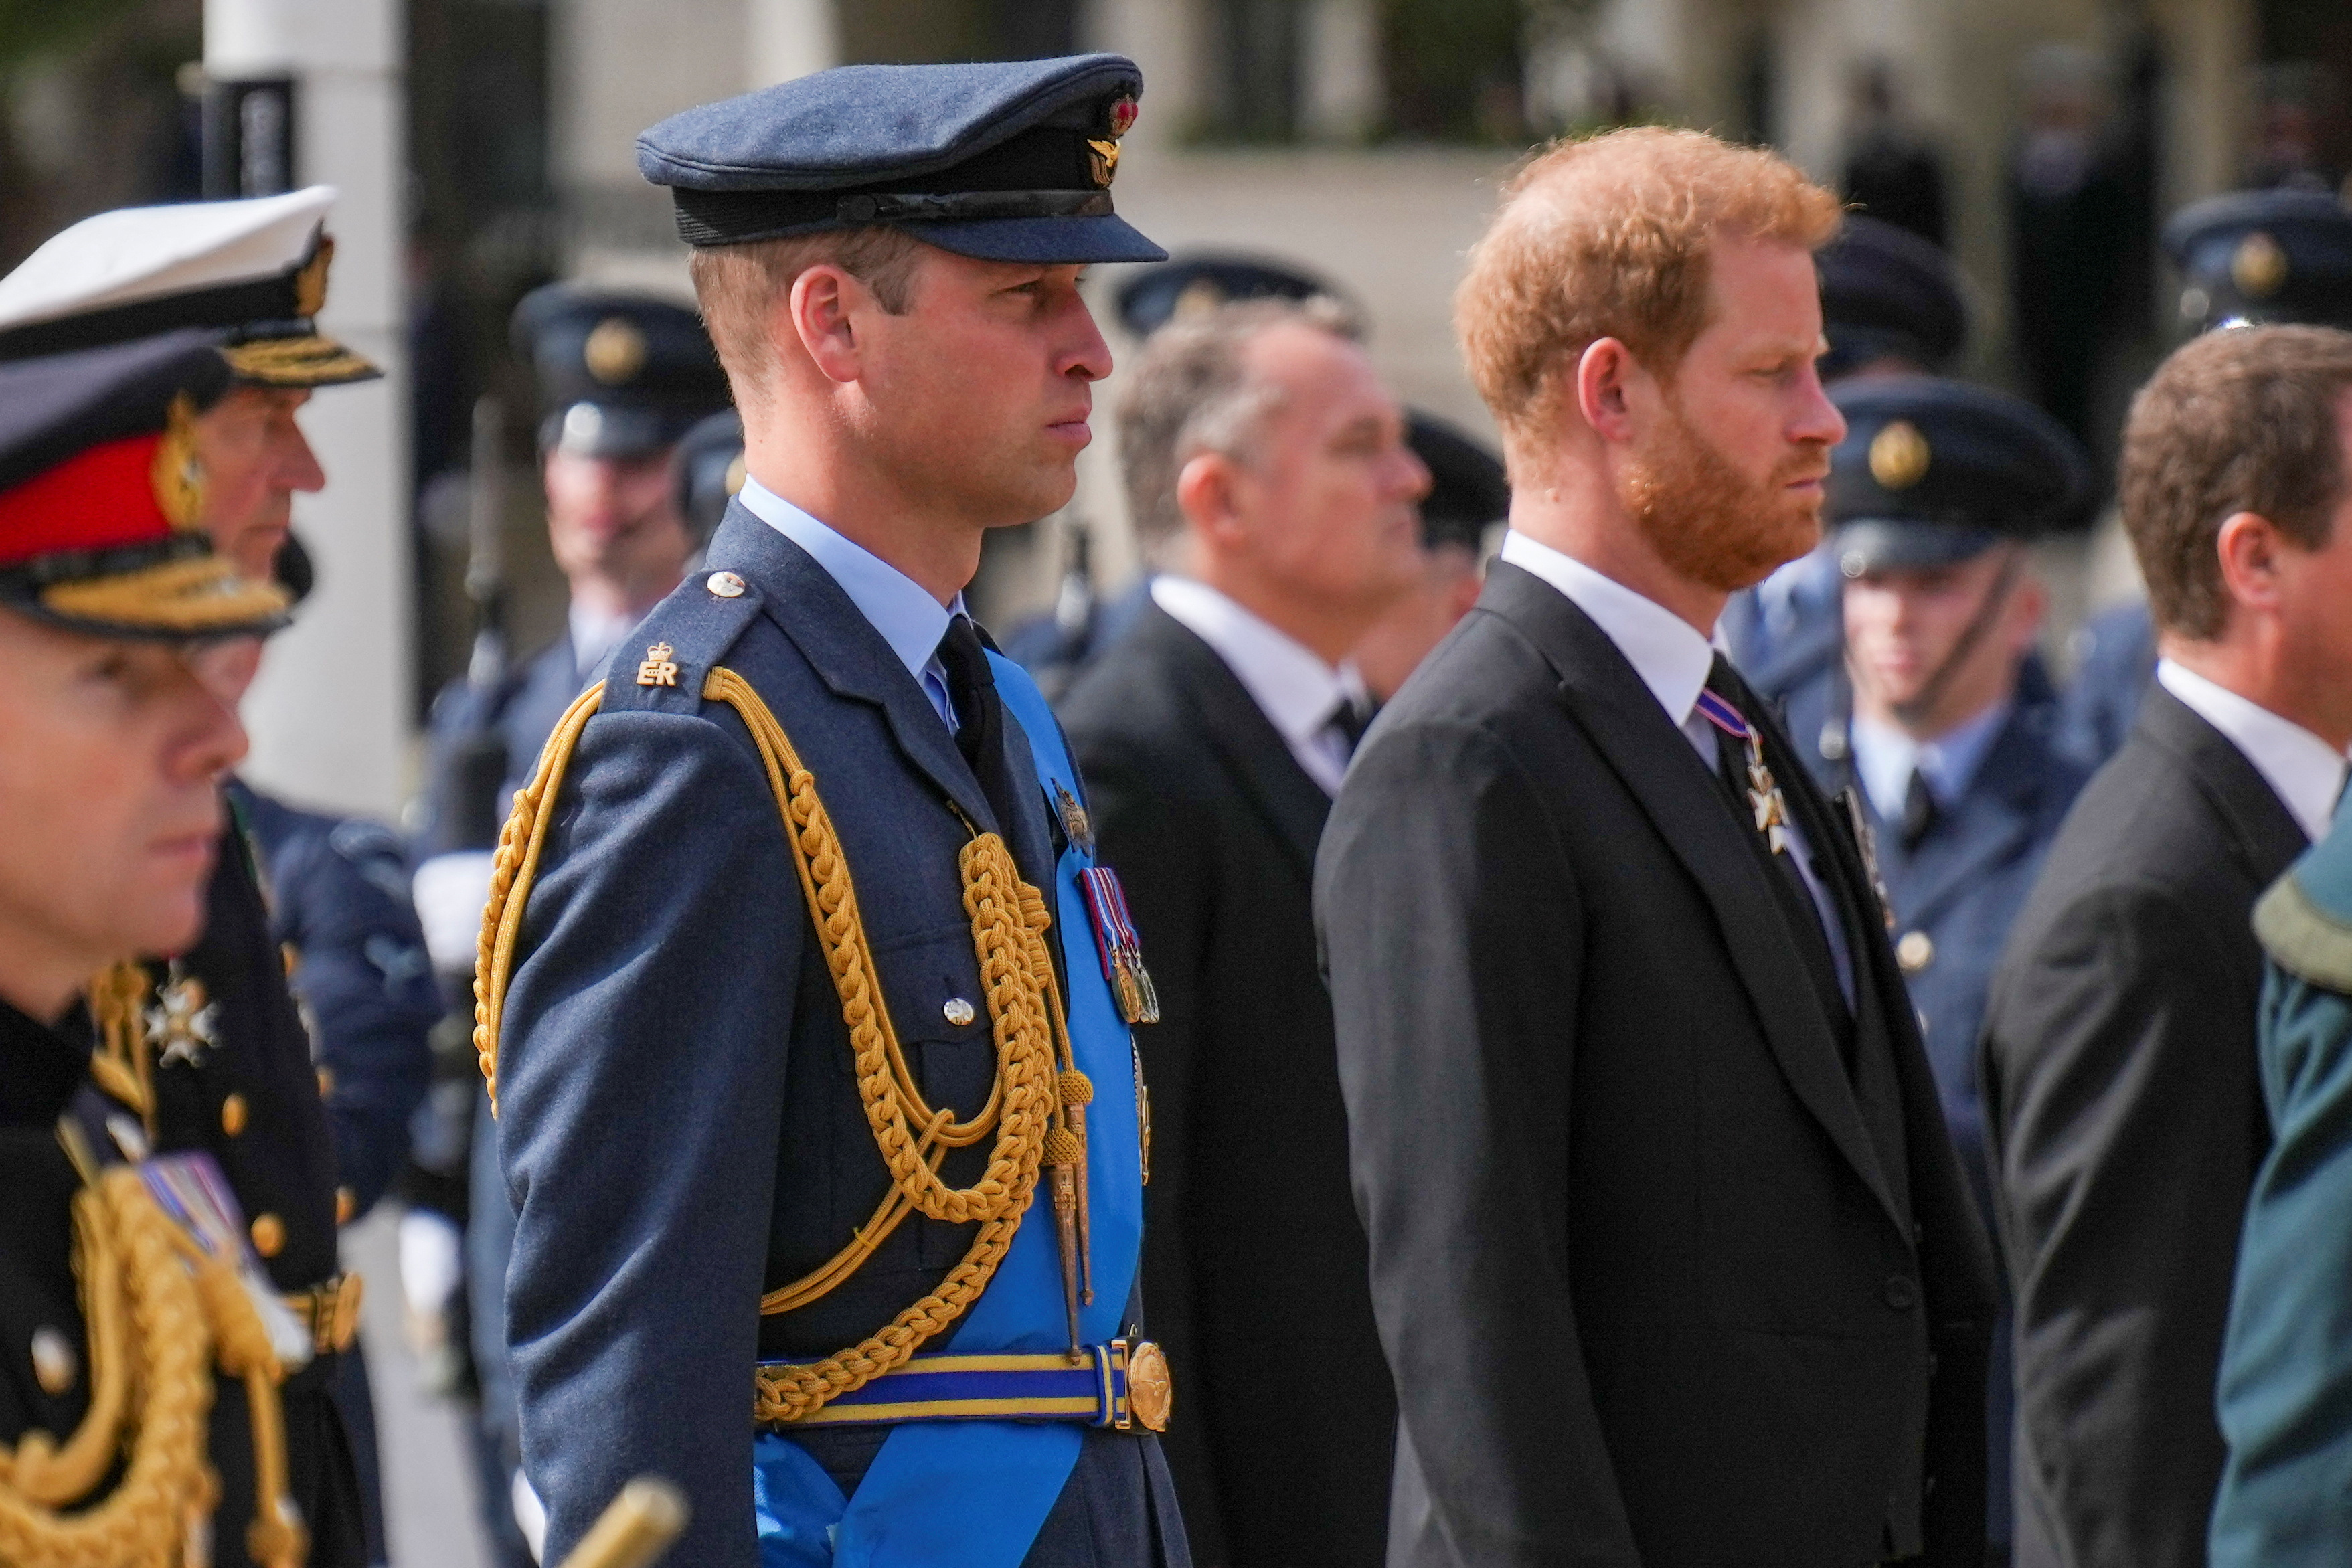 Prince William and Prince Harry walk behind the coffin of Queen Elizabeth II as it is pulled on a gun carriage through the streets of London following her funeral service at Westminster Abbey, Monday Sept. 19, 2022.The Queen, who died aged 96 on Sept. 8, will be buried at Windsor alongside her late husband, Prince Philip, who died last year.  Emilio Morenatti/Pool via REUTERS